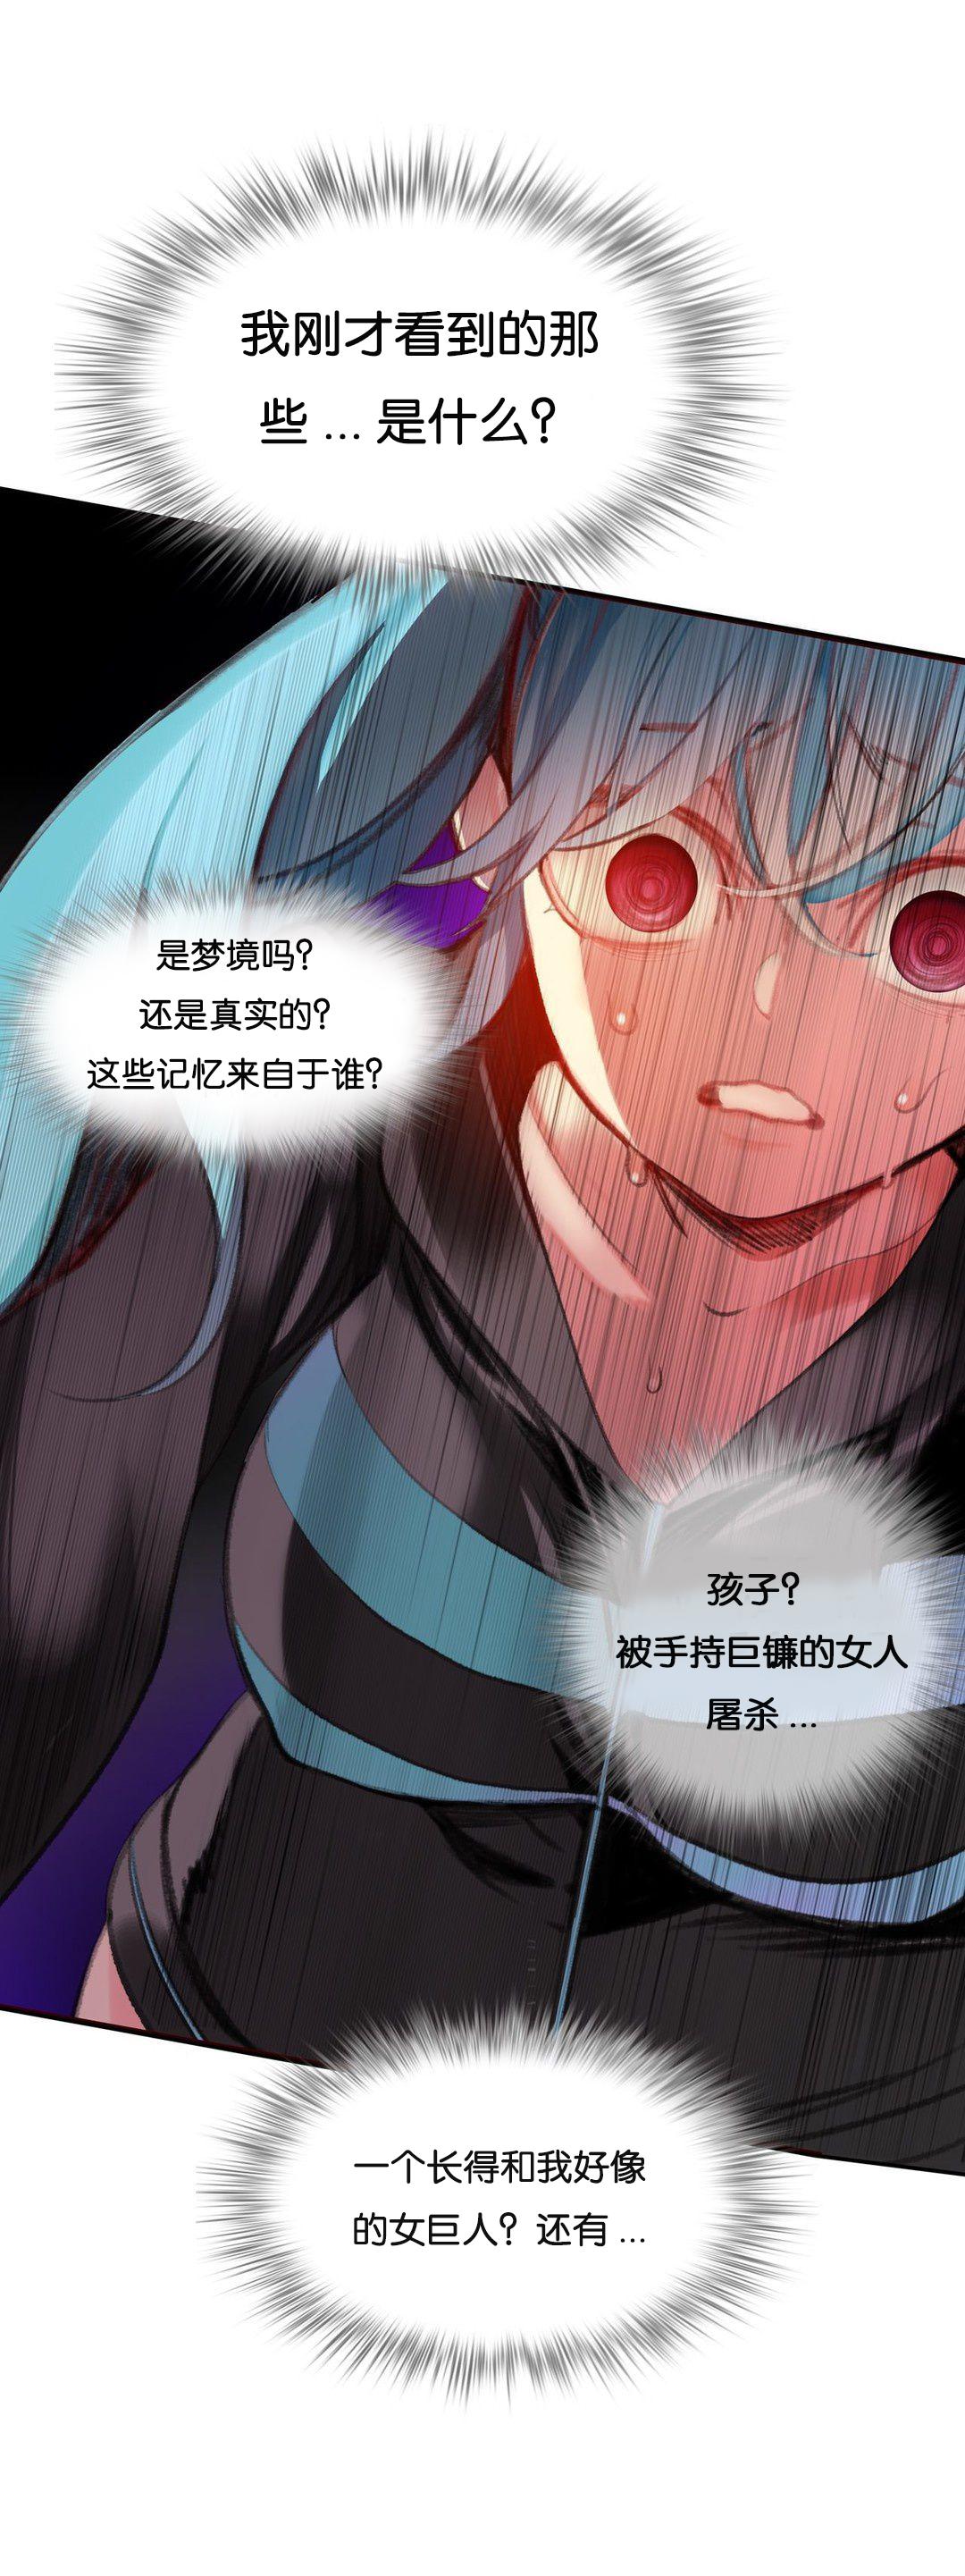 [Juder] Lilith`s Cord (第二季) Ch.61-64 [Chinese] [aaatwist个人汉化] [Ongoing] 74